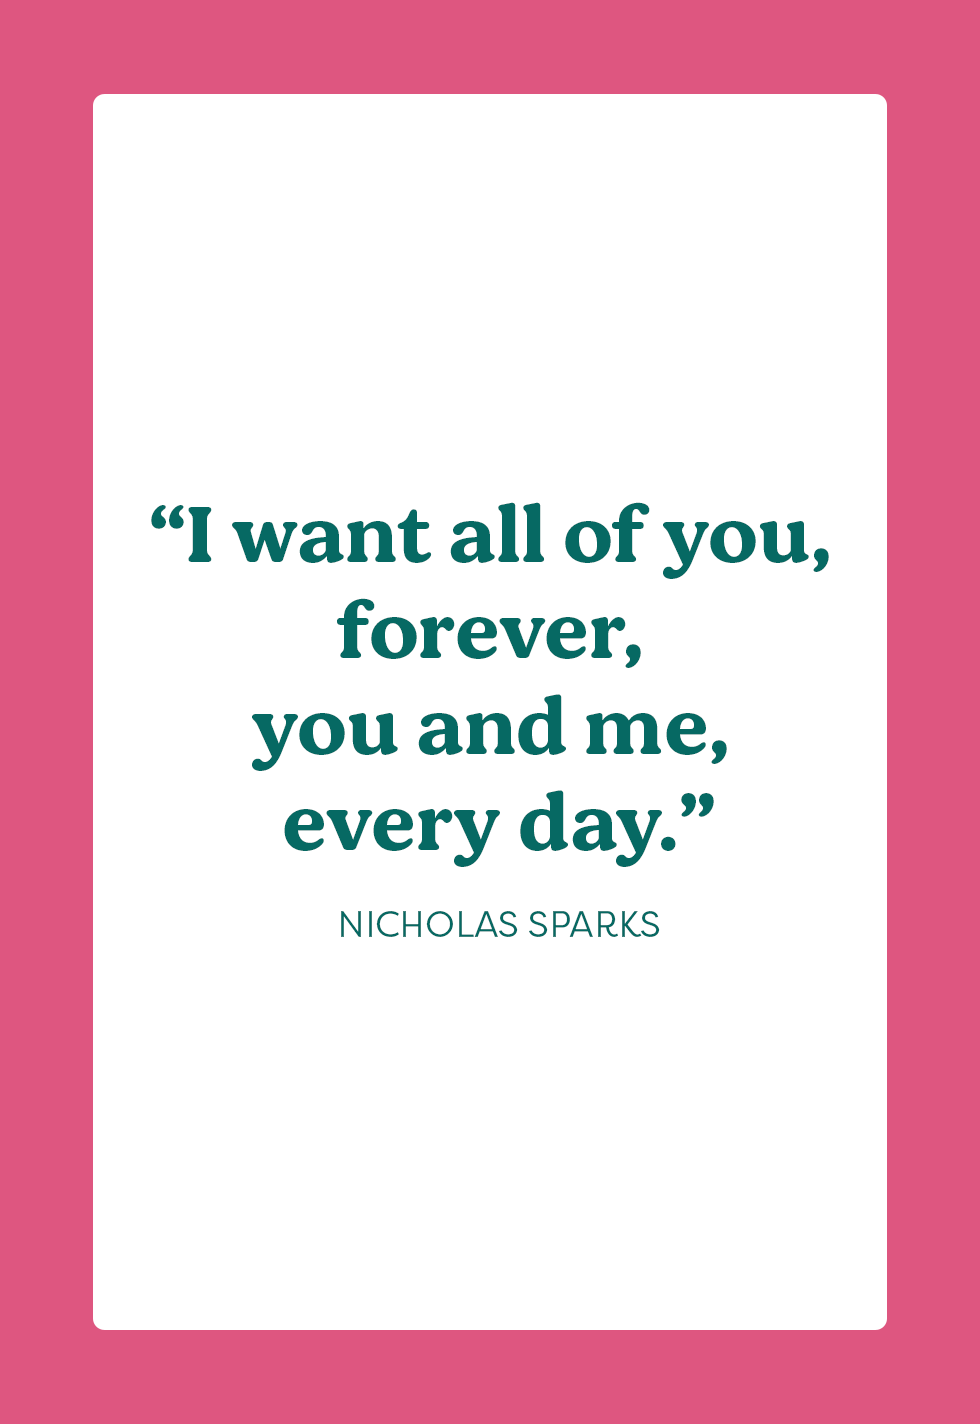 25 Best I Love You Quotes - Sayings and Messages About Love